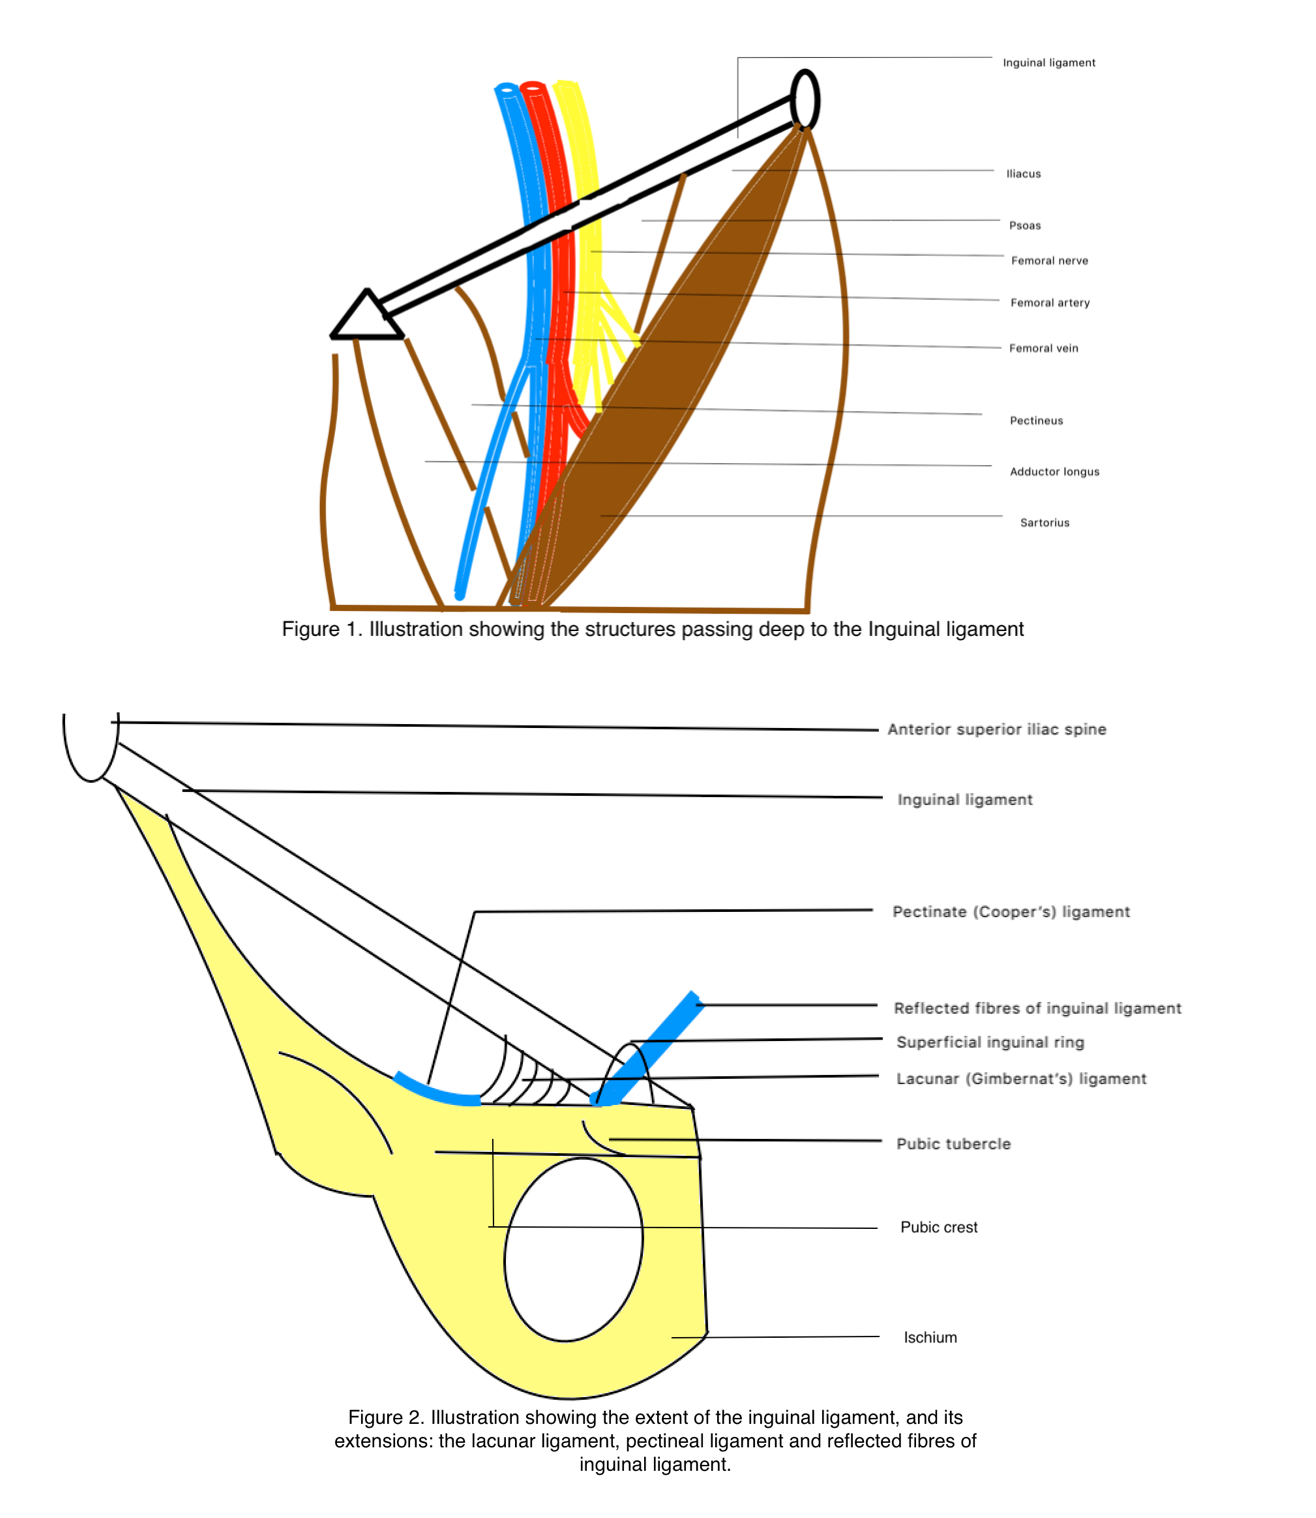 Figure 1: Structures passing deep to inguinal ligament
Figure 2: Extent and extensions of inguinal ligament